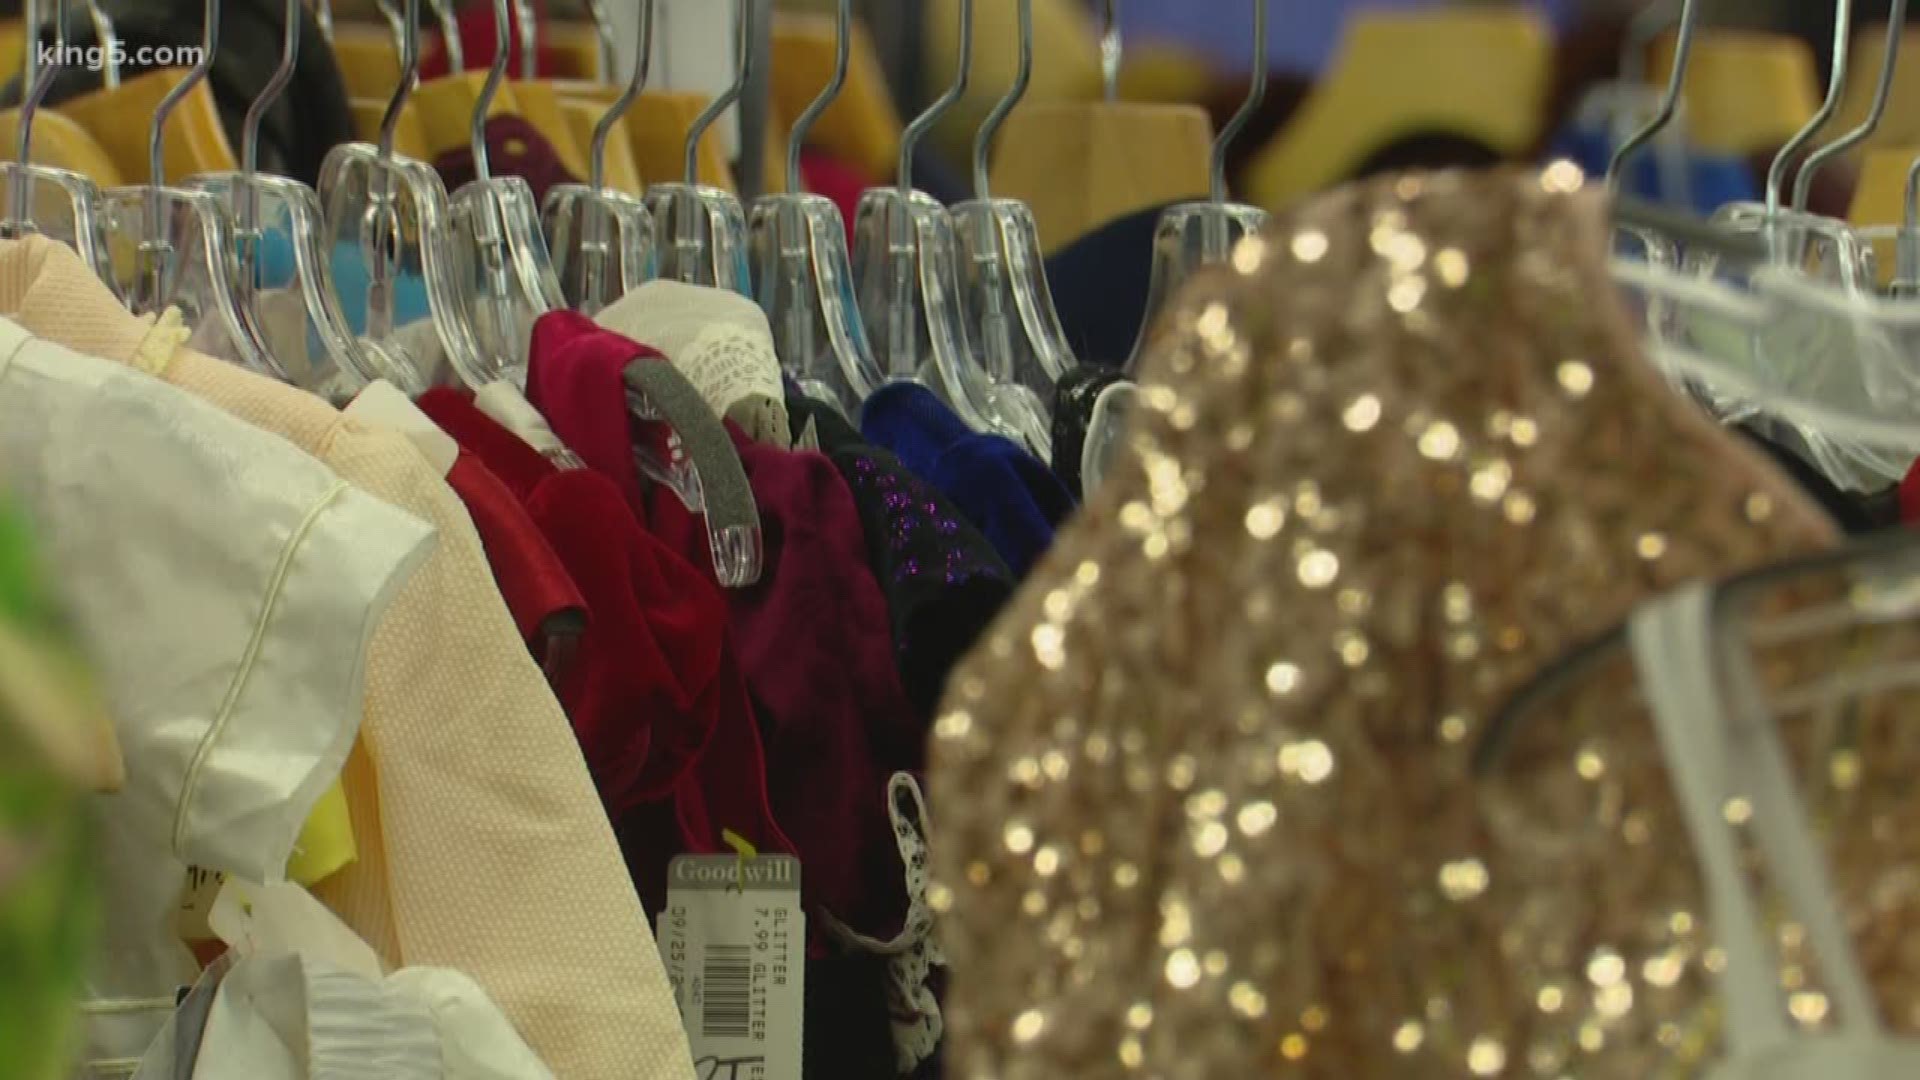 Goodwill says it's become too expensive to hold the glitter sale every year, so it's now working on better ways to support its mission.